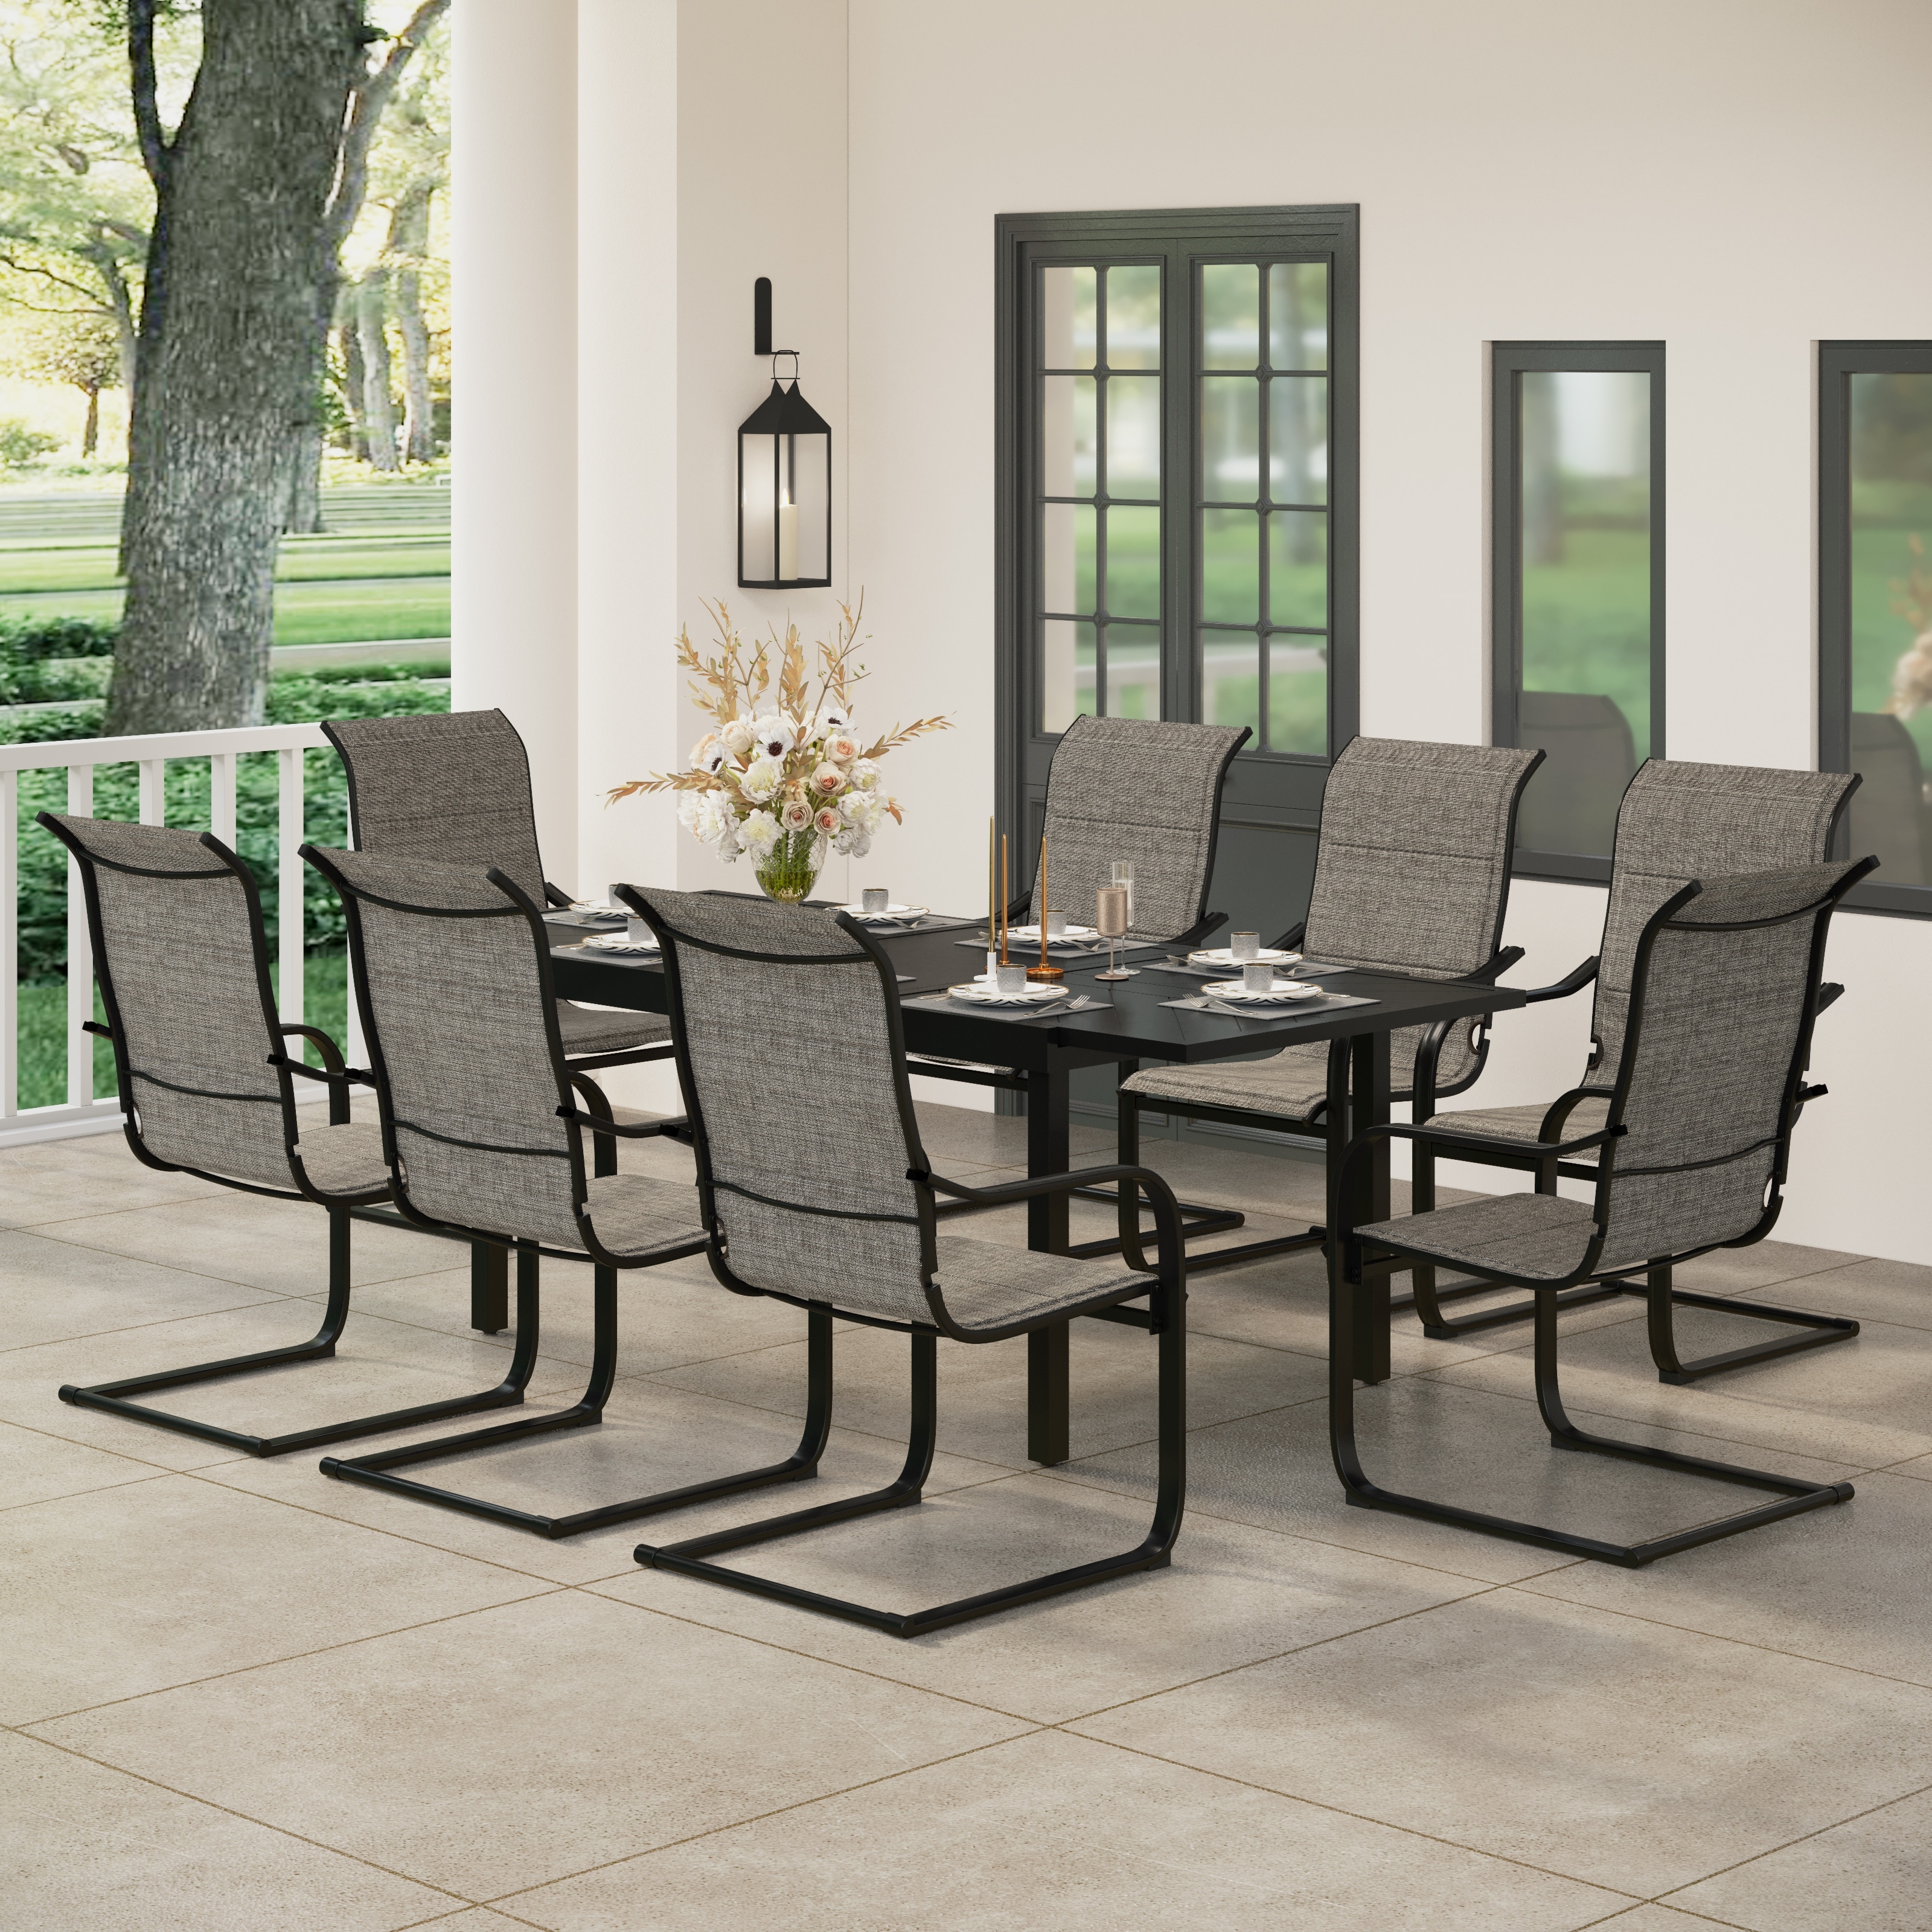 7/9-piece Patio Dining Set  Expendable Rectangular Outdoor Dining Table With C Spring Rocking Chairs